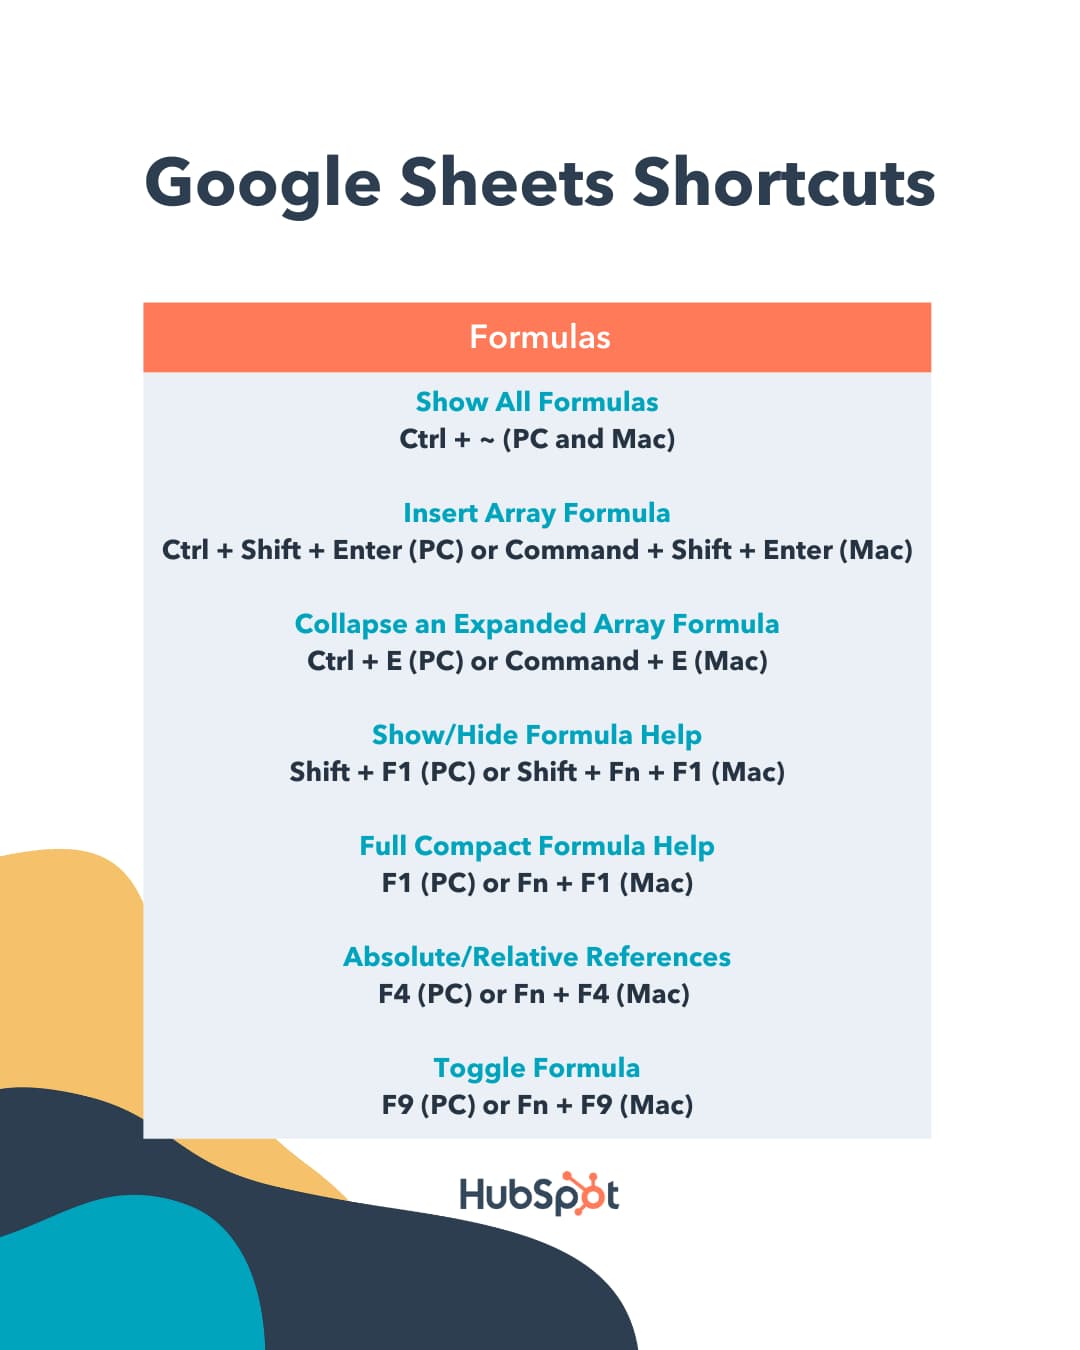 Use Google Spreadsheets shortcuts to show all formulas, insert array formulas, and more